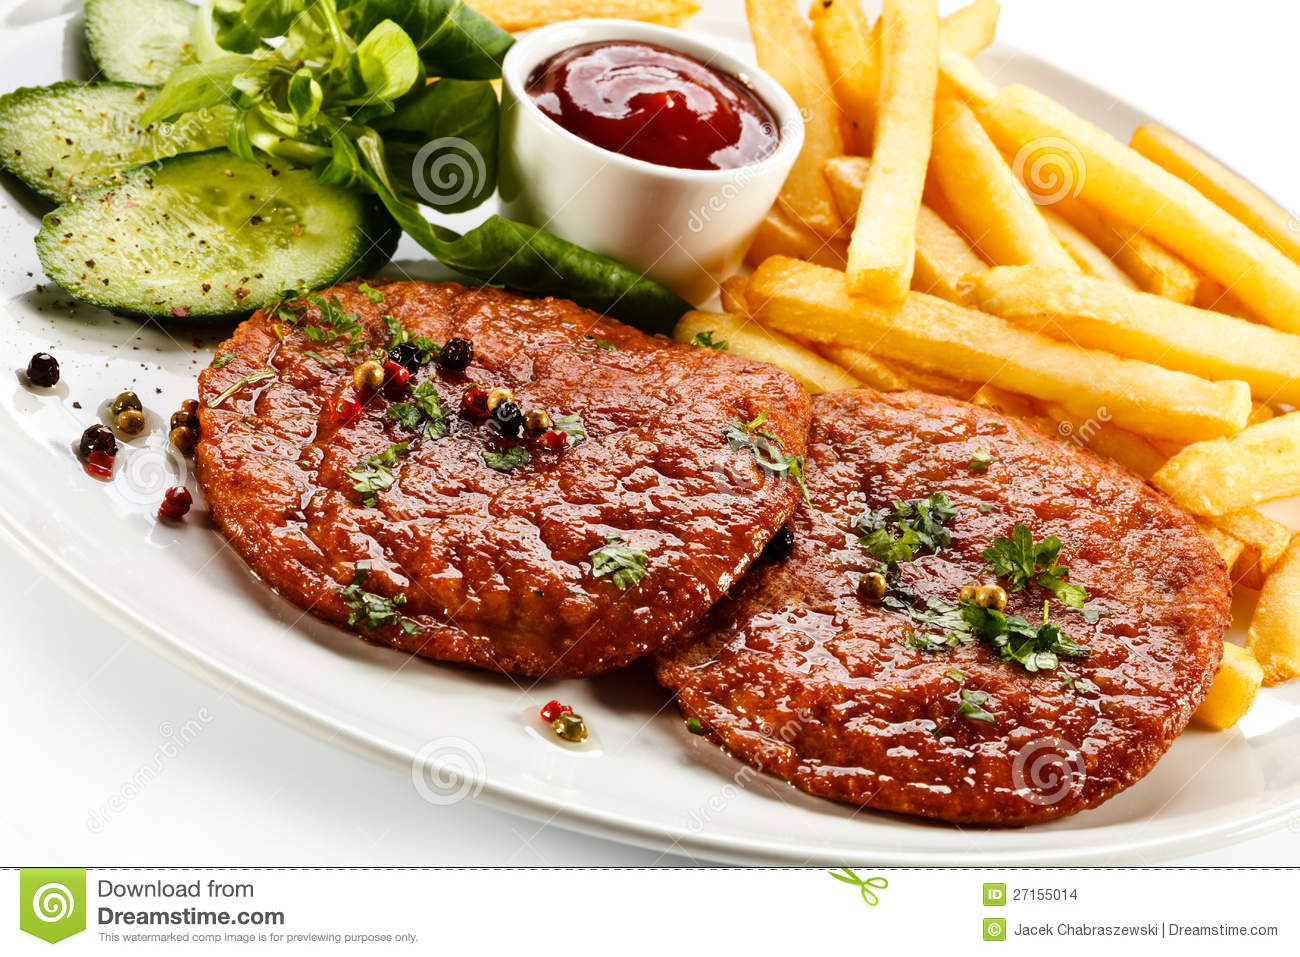 Grilled Steak And French Fries Stock Images   Image  27155014